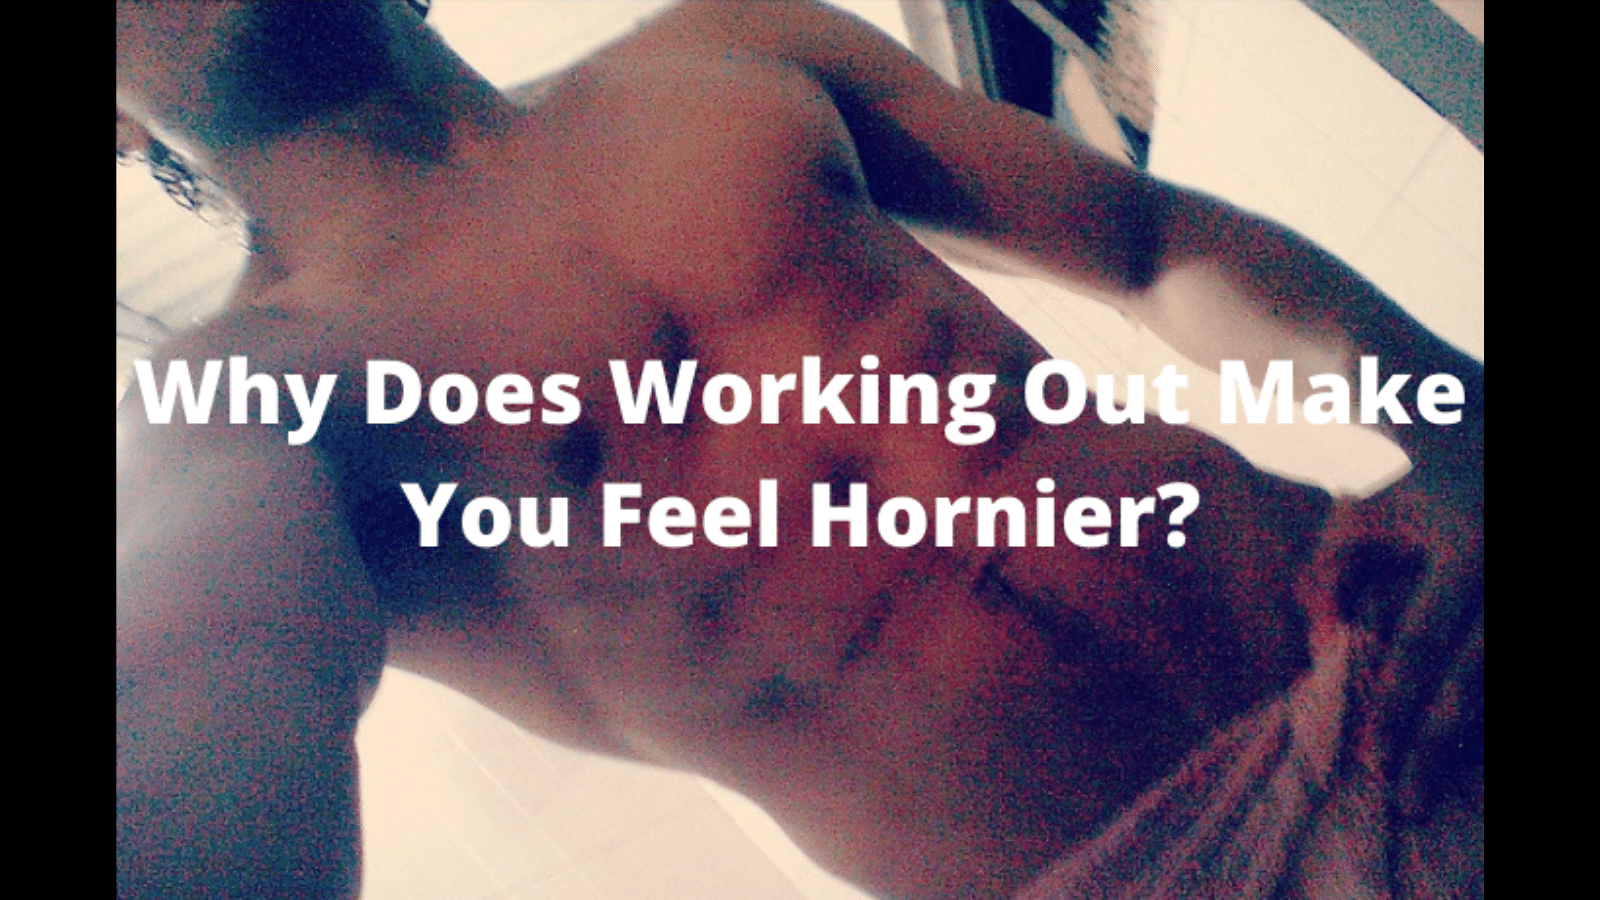 bhavana chawla recommends why does working out make me horny pic